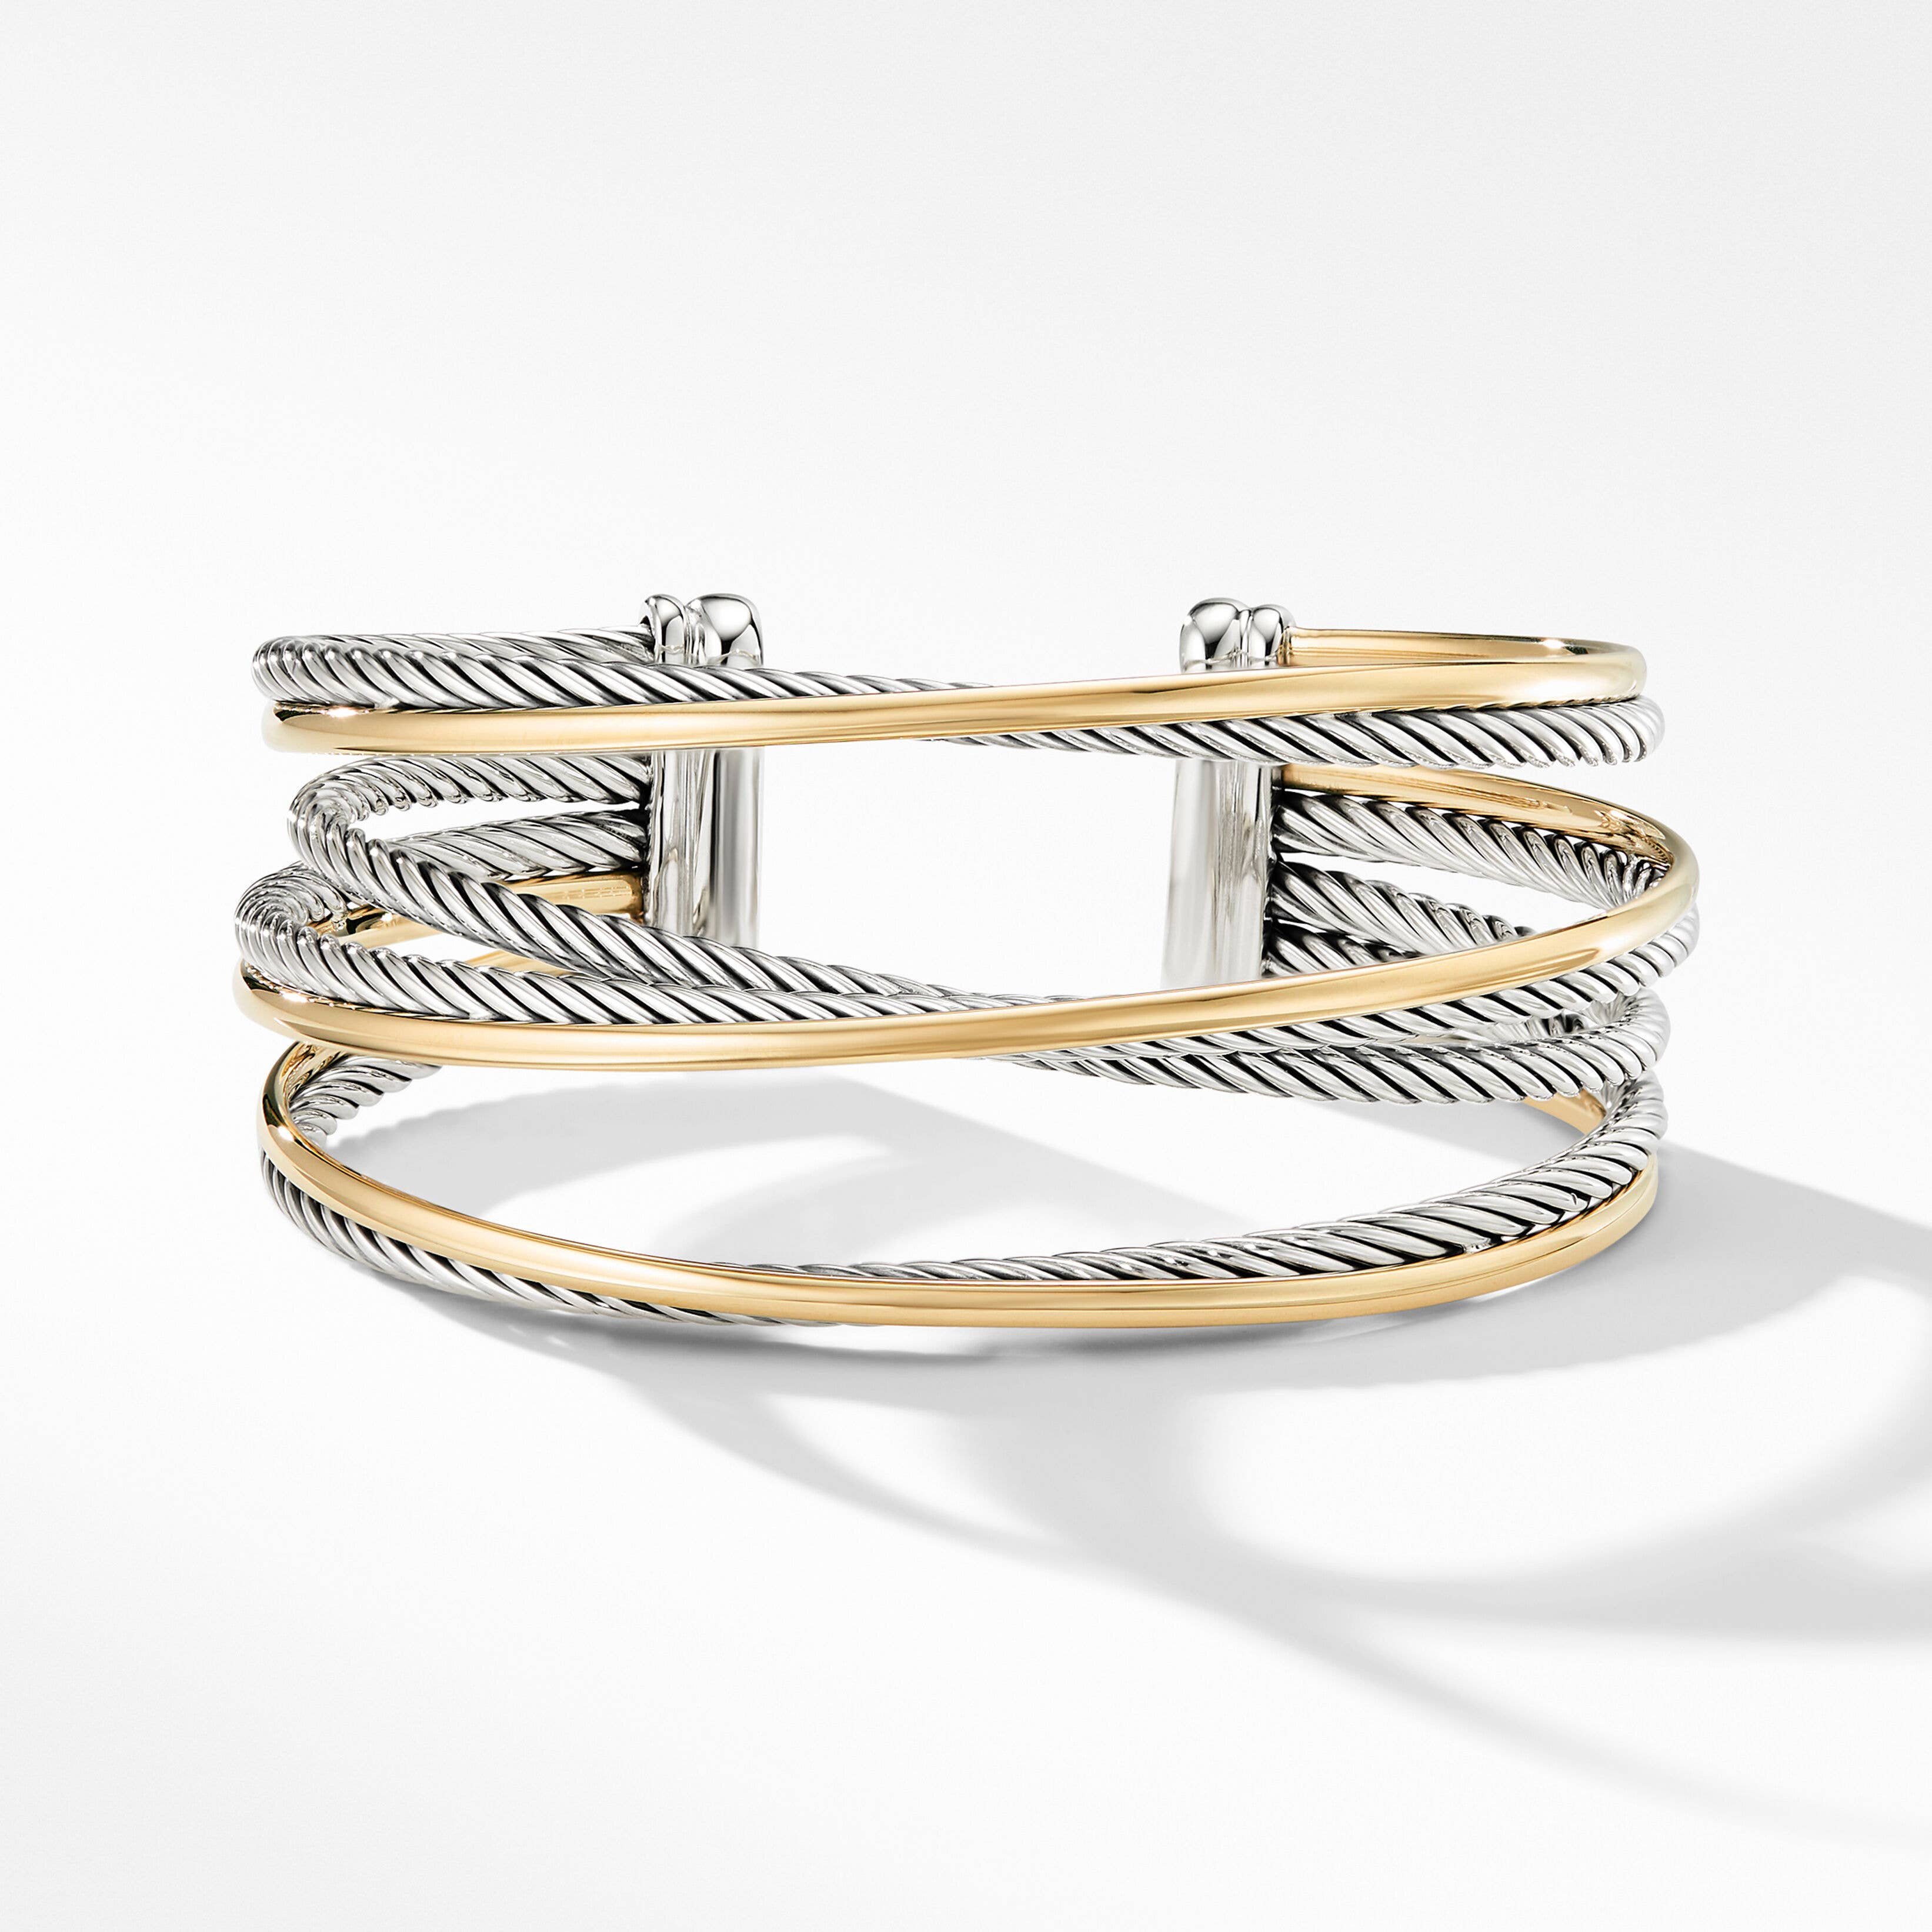 Crossover Four Row Cuff Bracelet in Sterling Silver with 18K Yellow Gold